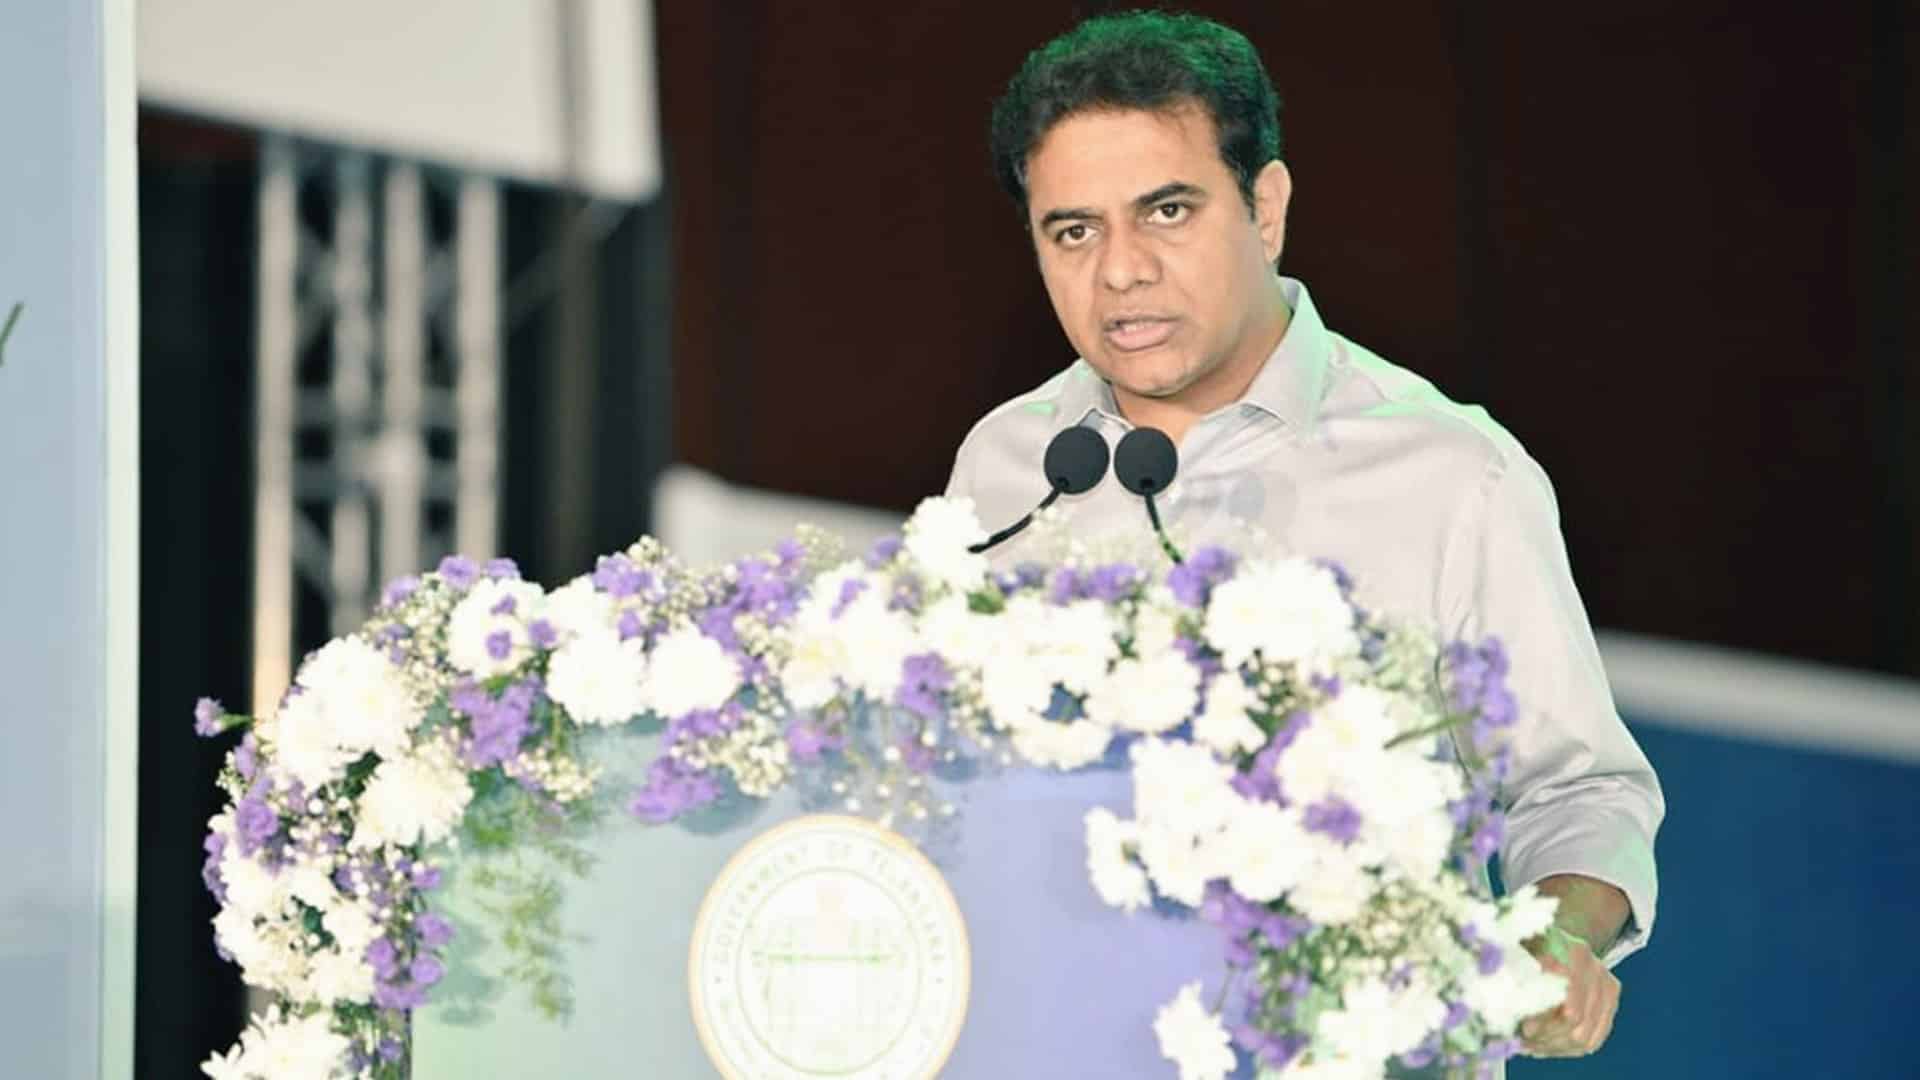 Telangana will play pivotal role in India's e-mobility transition: Minister KTR